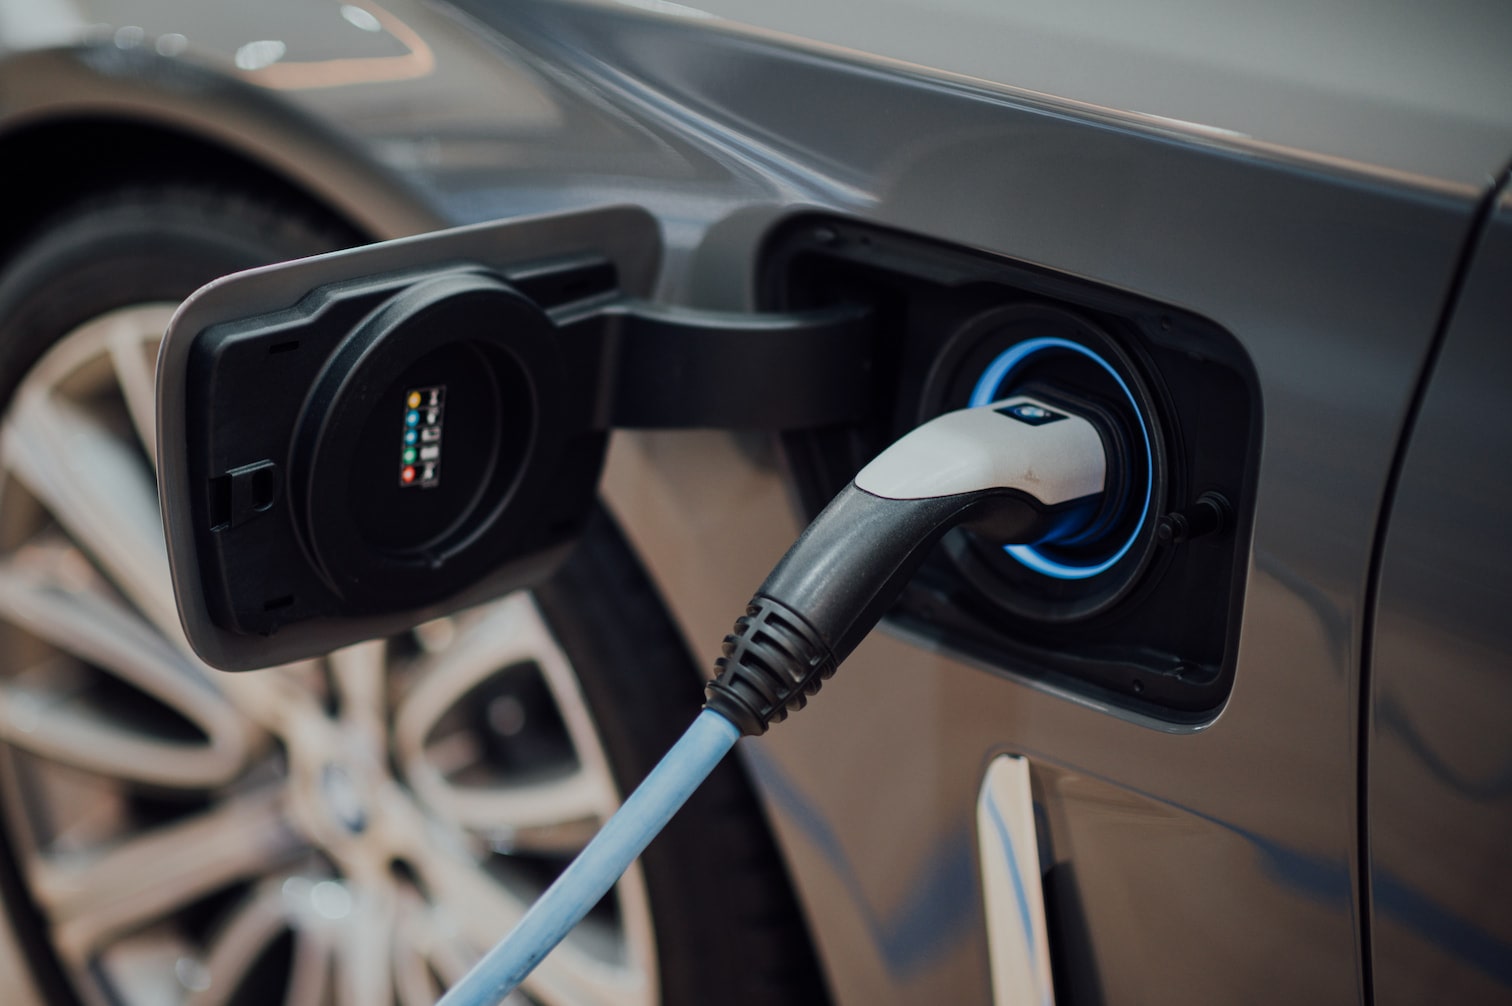 thumb-The 5 largest electric vehicle manufacturers in the world-min